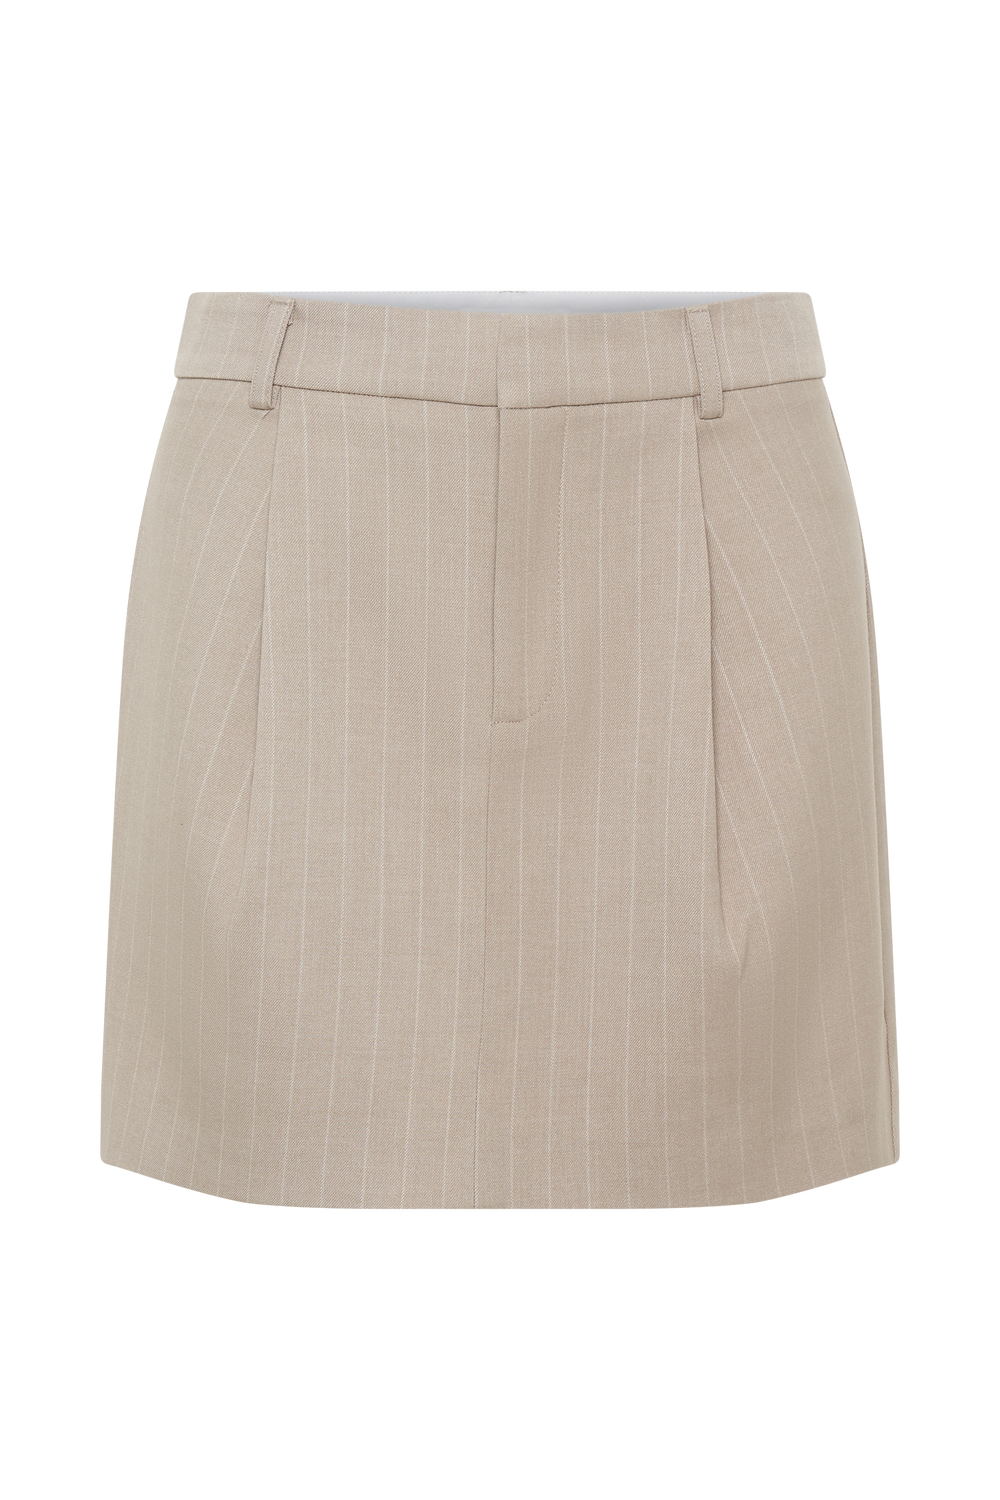 Tracey Suiting Mini Skirt - Taupe Pinstripe